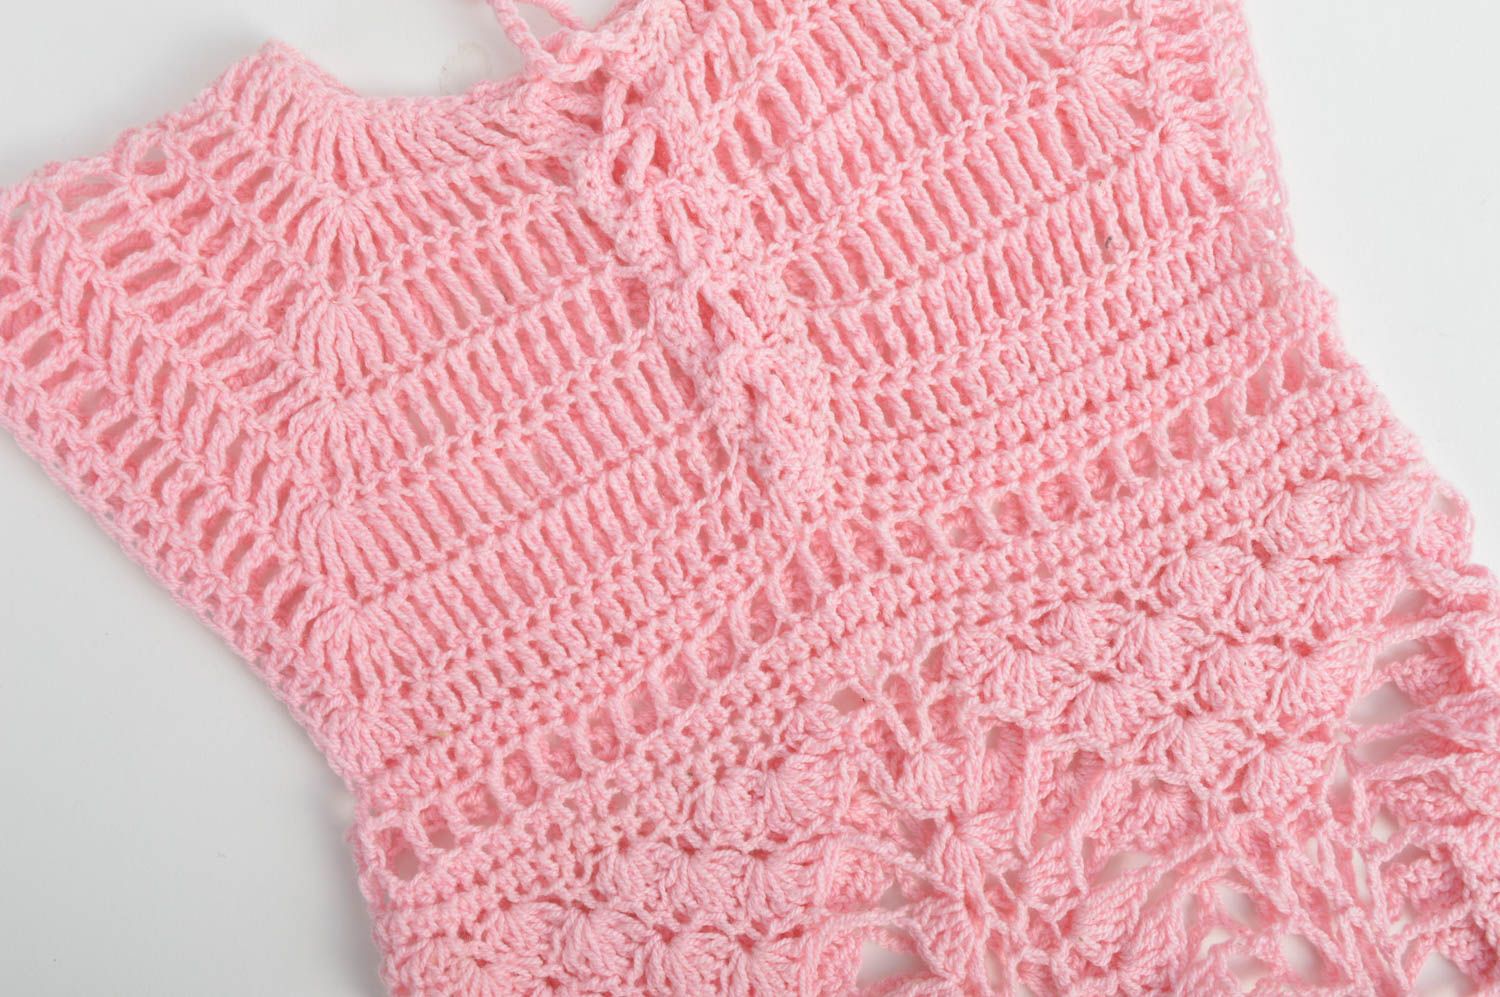 Beautiful crochet delicate dress made of cotton in pink color for baby girls photo 4